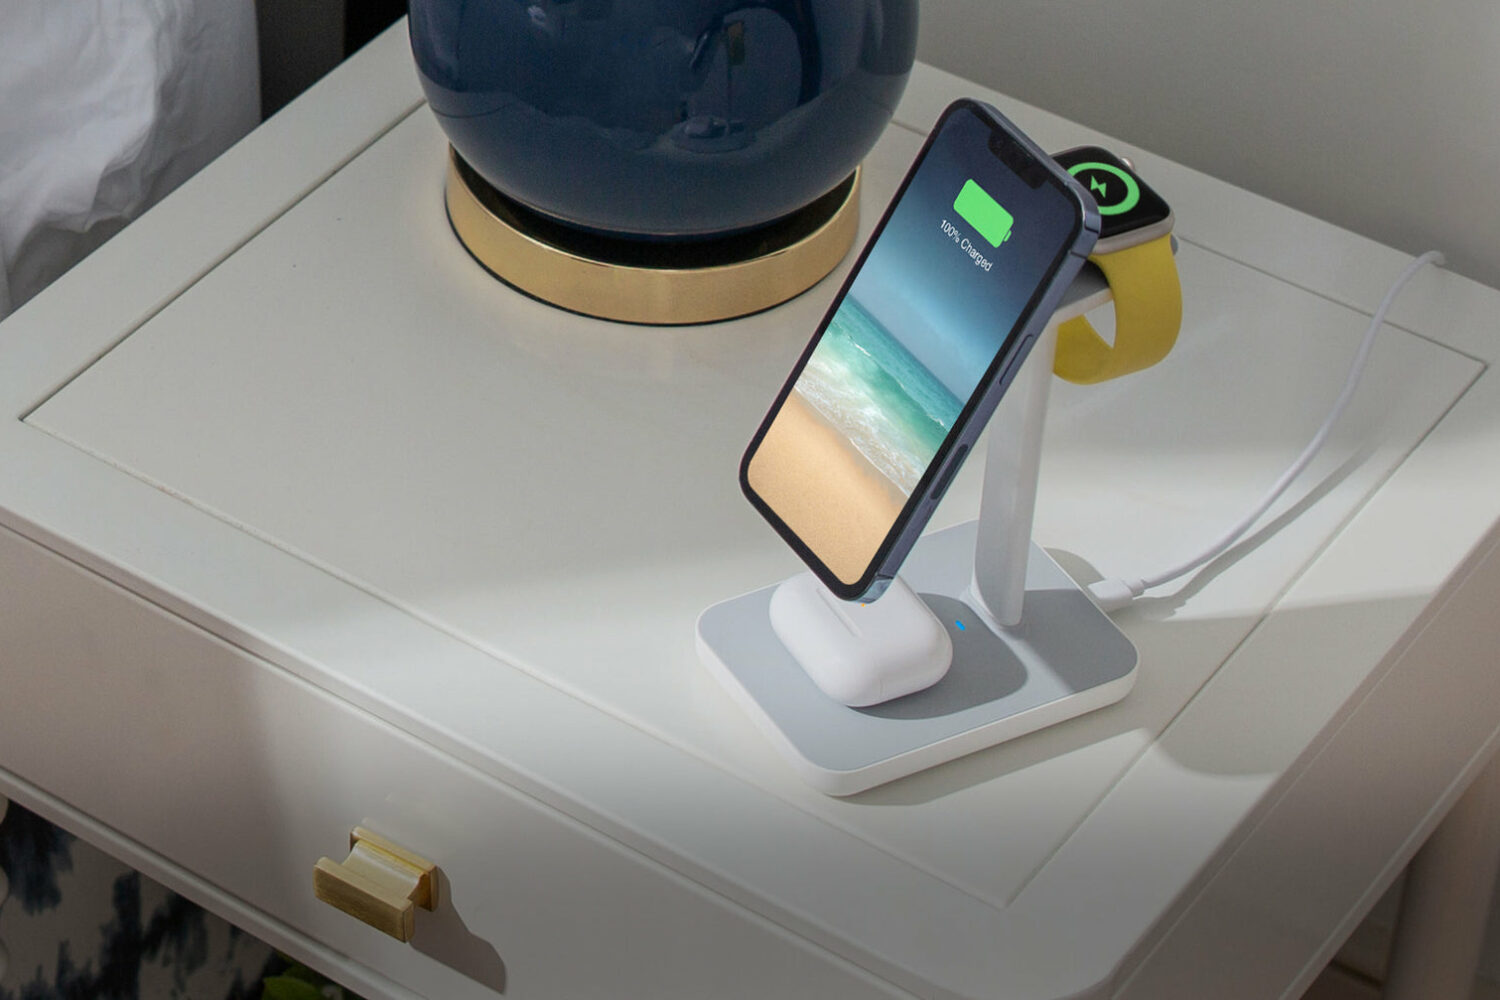 Twelve South's multi-device HiRise 3 stand is charging a MagSafe iPhone, an Apple Watch and an AirPods Pro charging case simultaneously